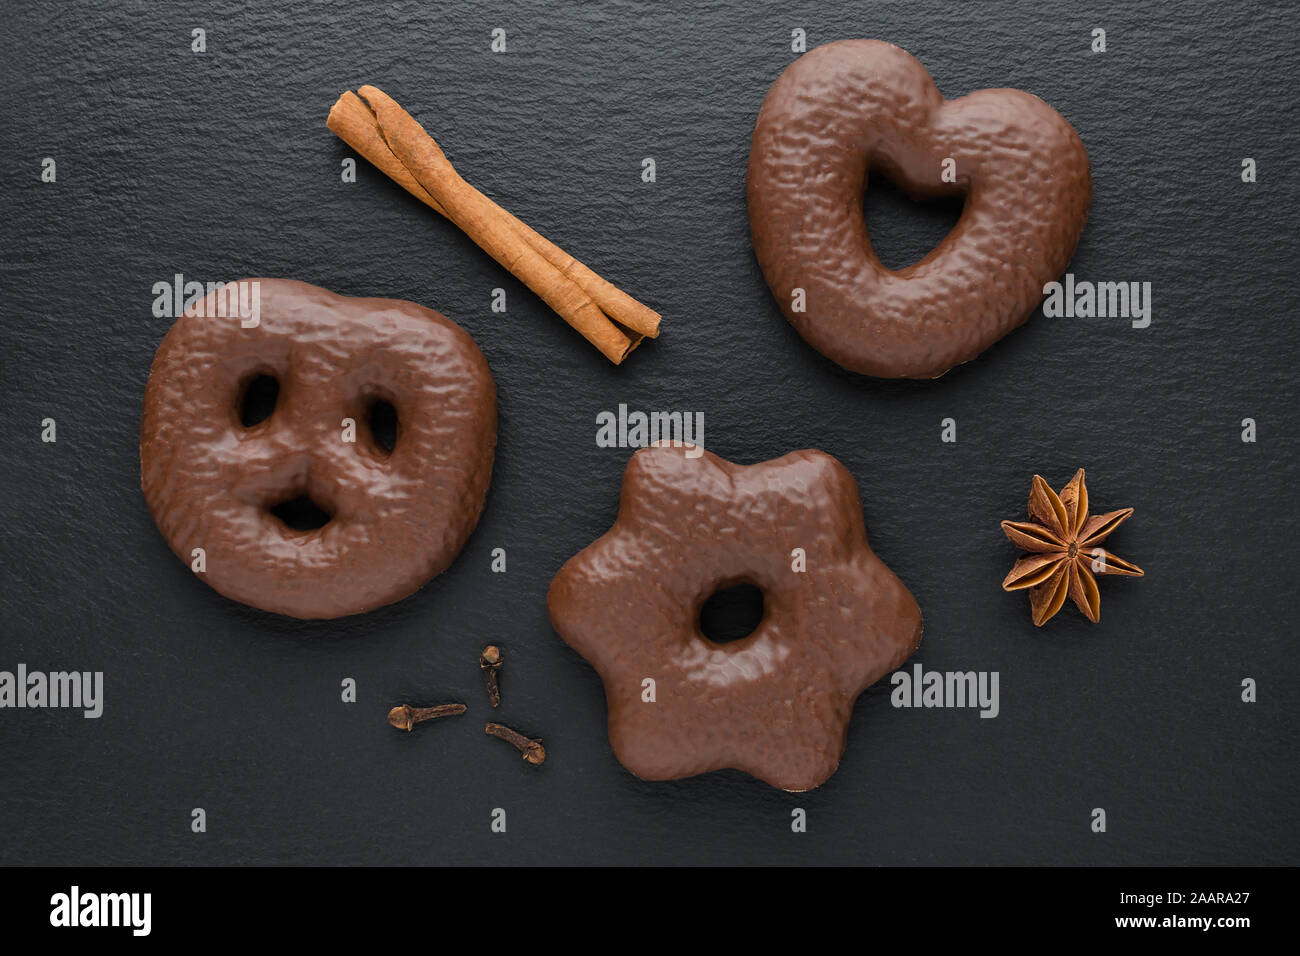 traditional german christmas chocolate gingerbread lebkuchen with cinnamon sticks, anise and clove Stock Photo